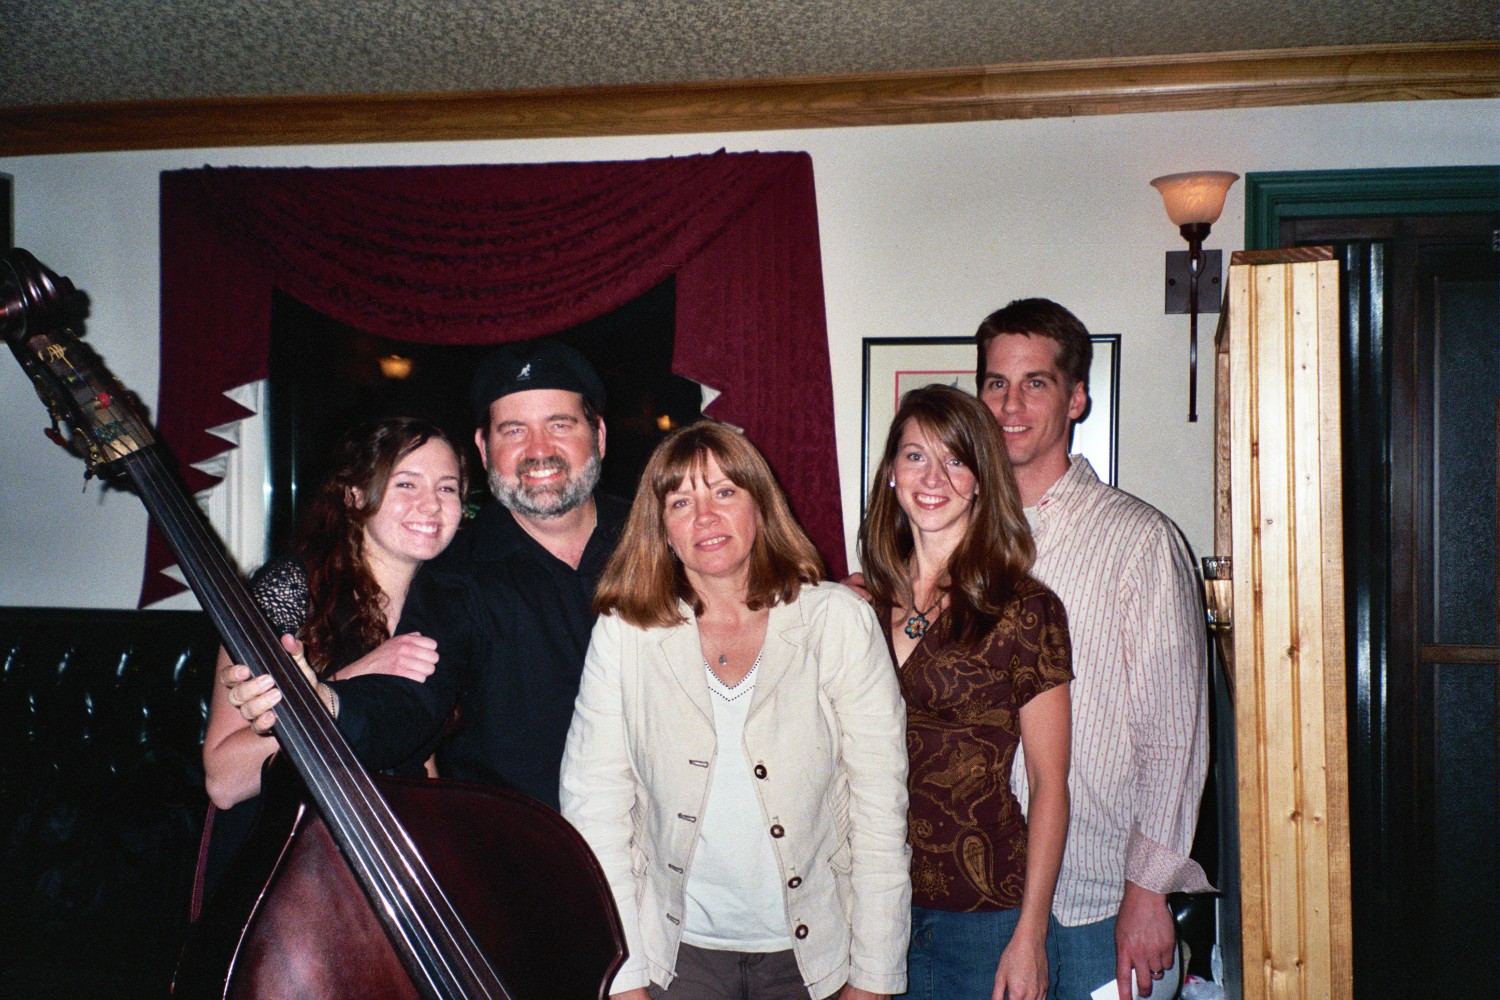 Family photo with the Wise Guy
notice he doesn't let go of the bass....
